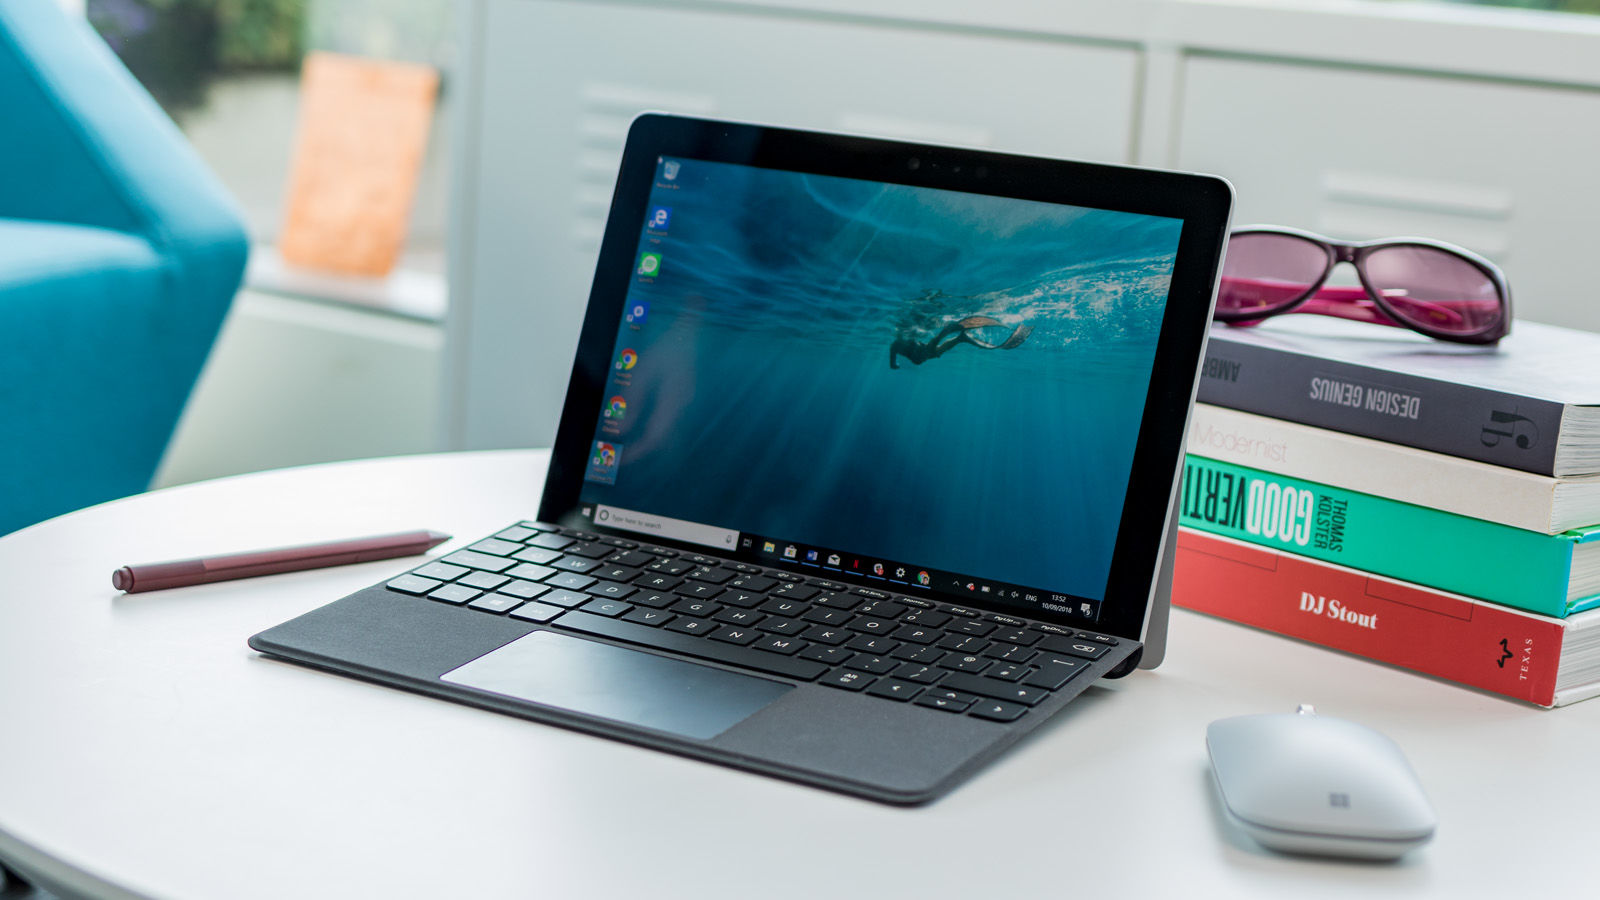 Microsoft Surface Book 3 Release Date and Price